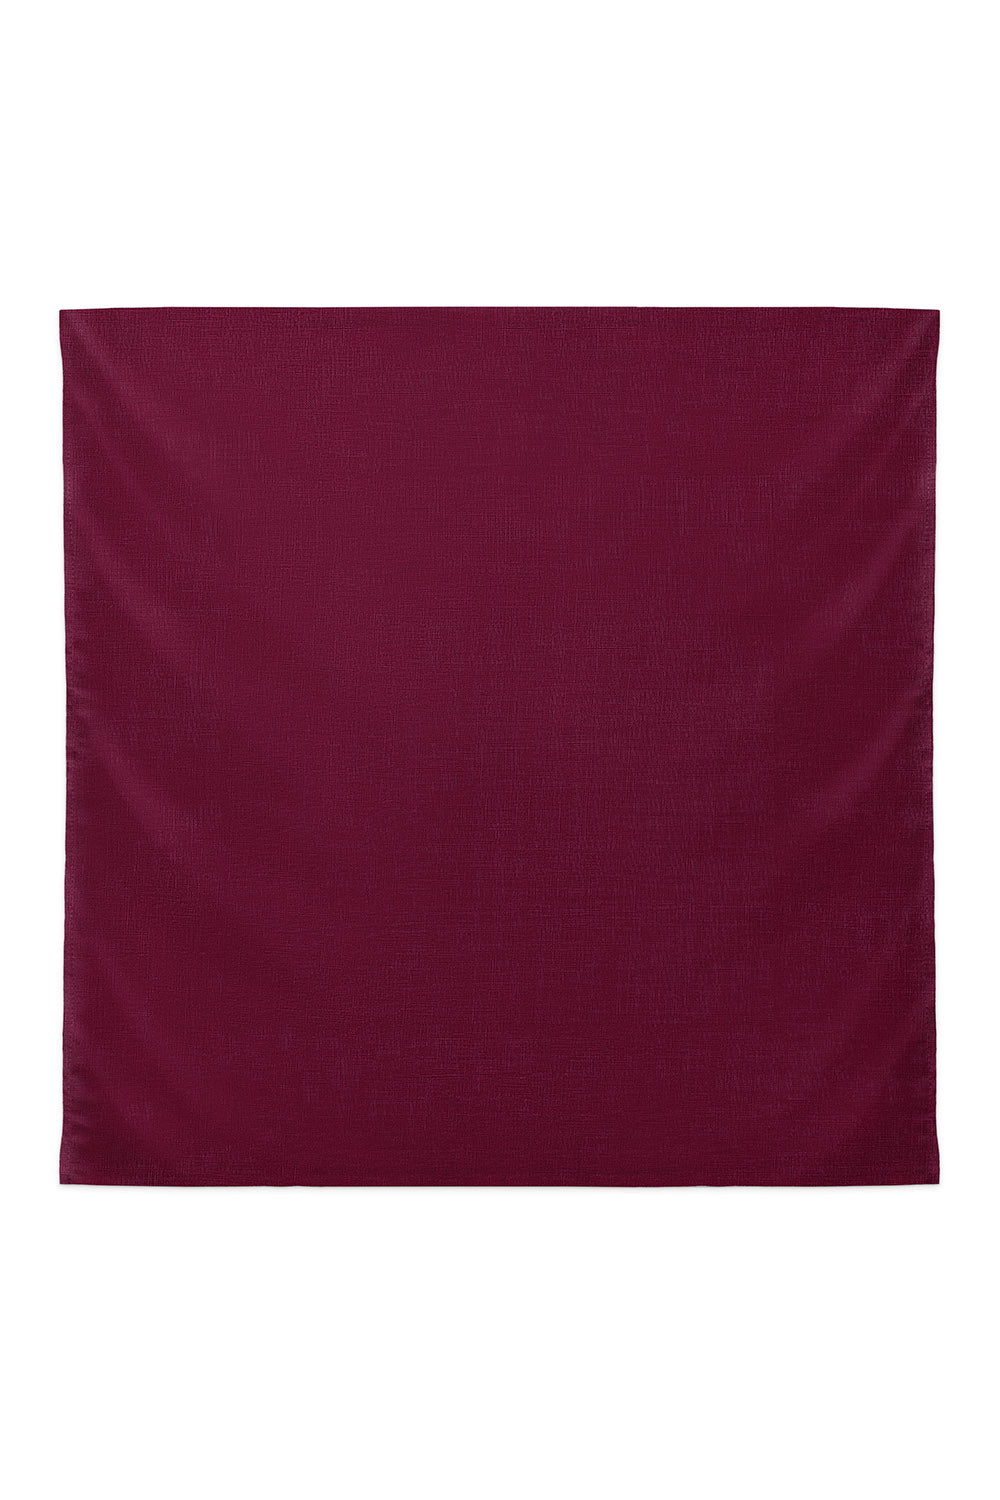 RR Basic Cotton Scarf in Maroon